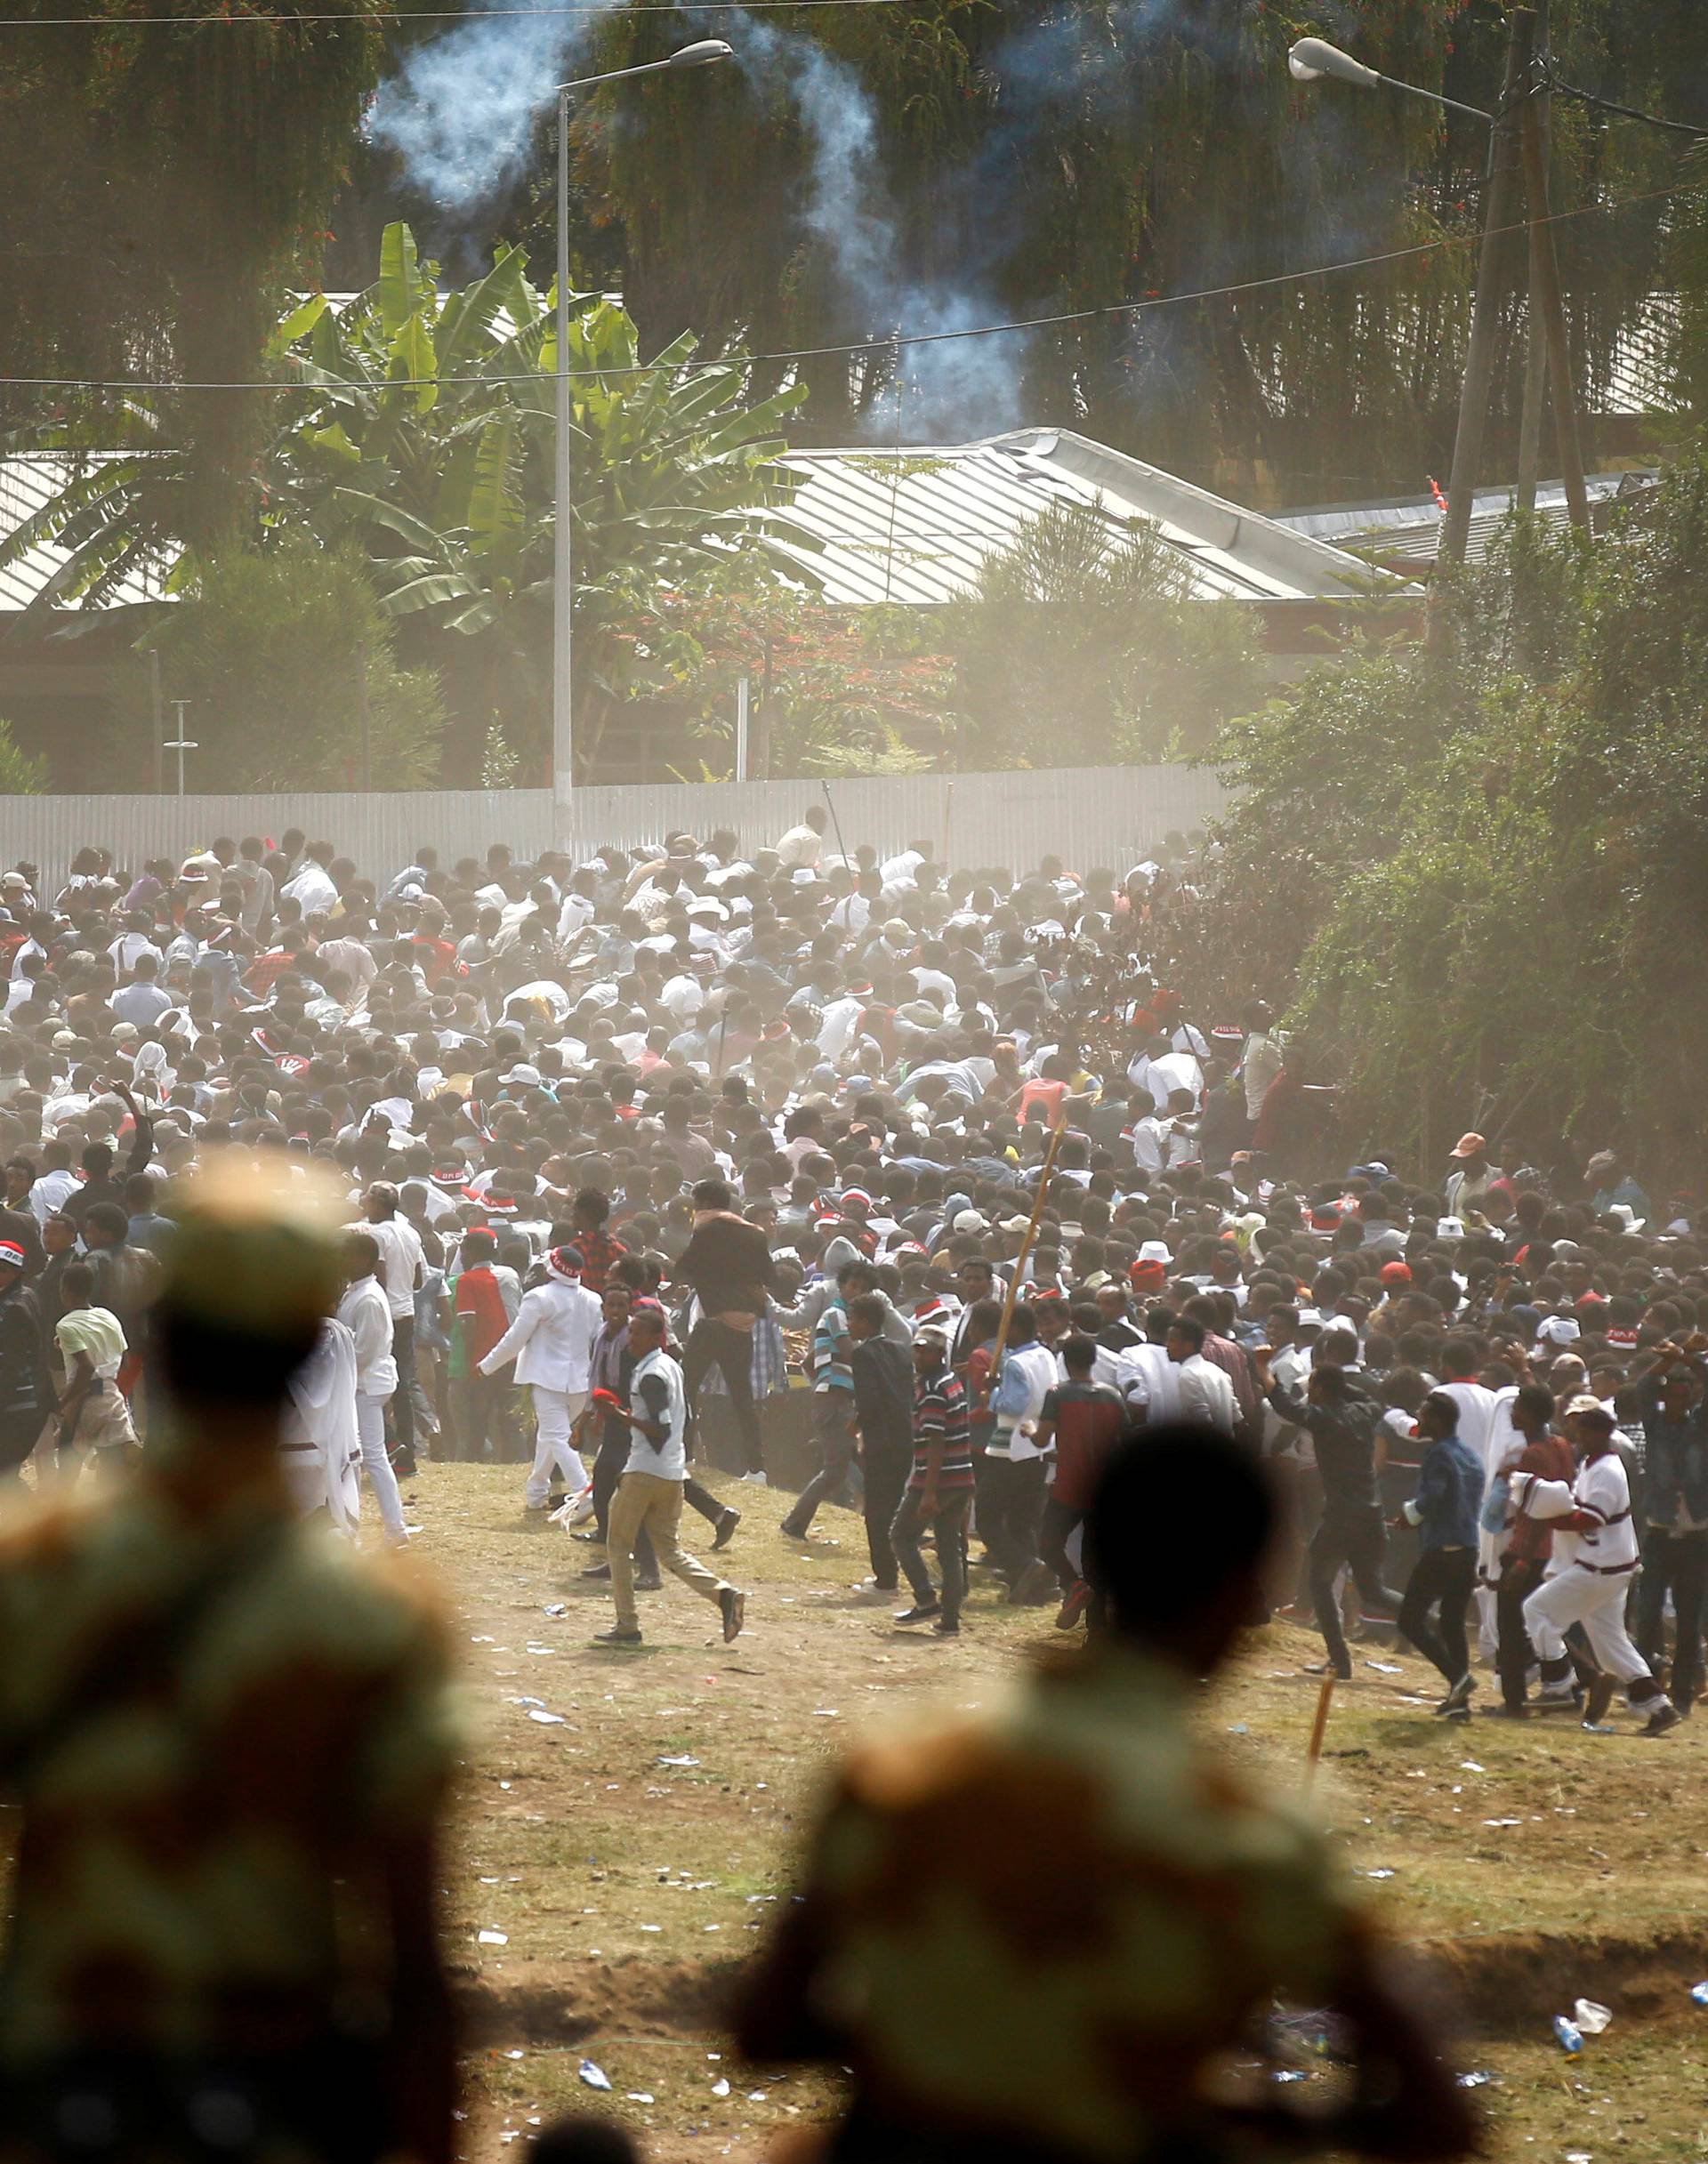 Protestors run from tear gas launched by security personnel during the Irecha, the thanks giving festival of the Oromo people in Bishoftu town of Oromia region, Ethiopia